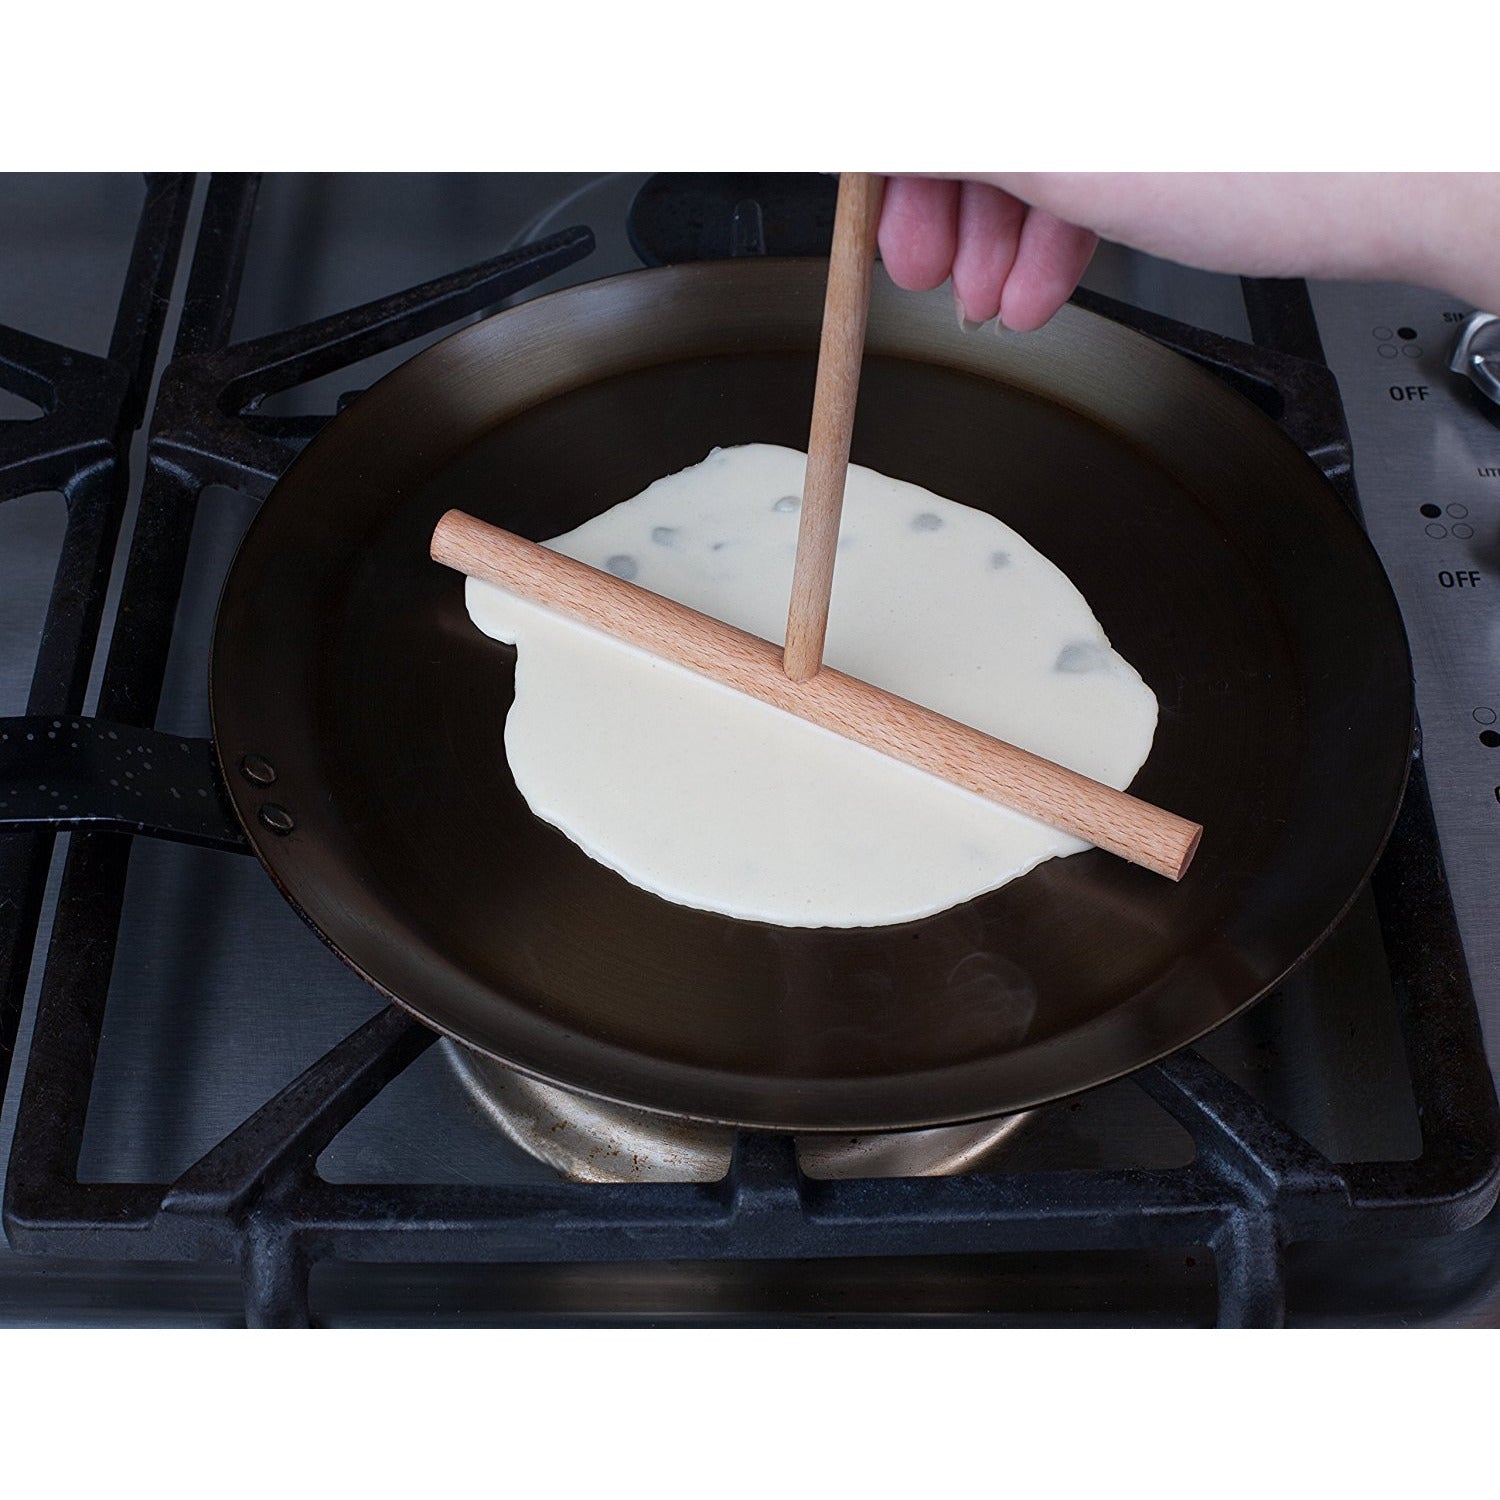 de Buyer Blue Carbon Steel Crepe & Tortilla Pan - 9.5” - Ideal for Making &  Reheating Crepes, Tortillas & Pancakes - Naturally Nonstick - Made in